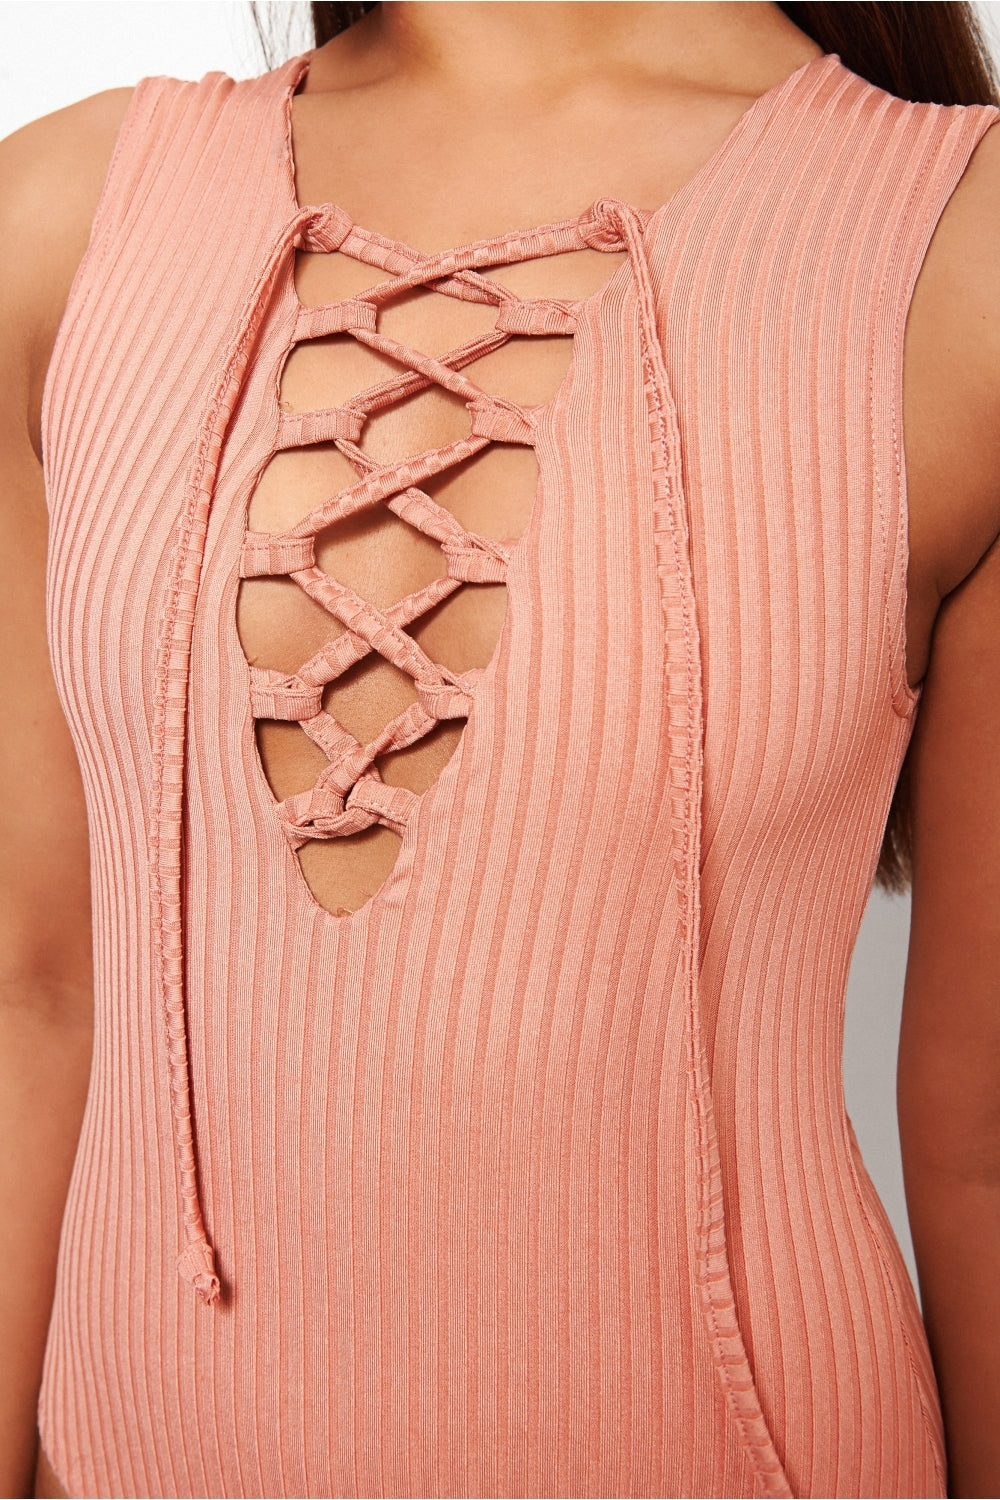 Coral Pink Lace Up Bodysuit